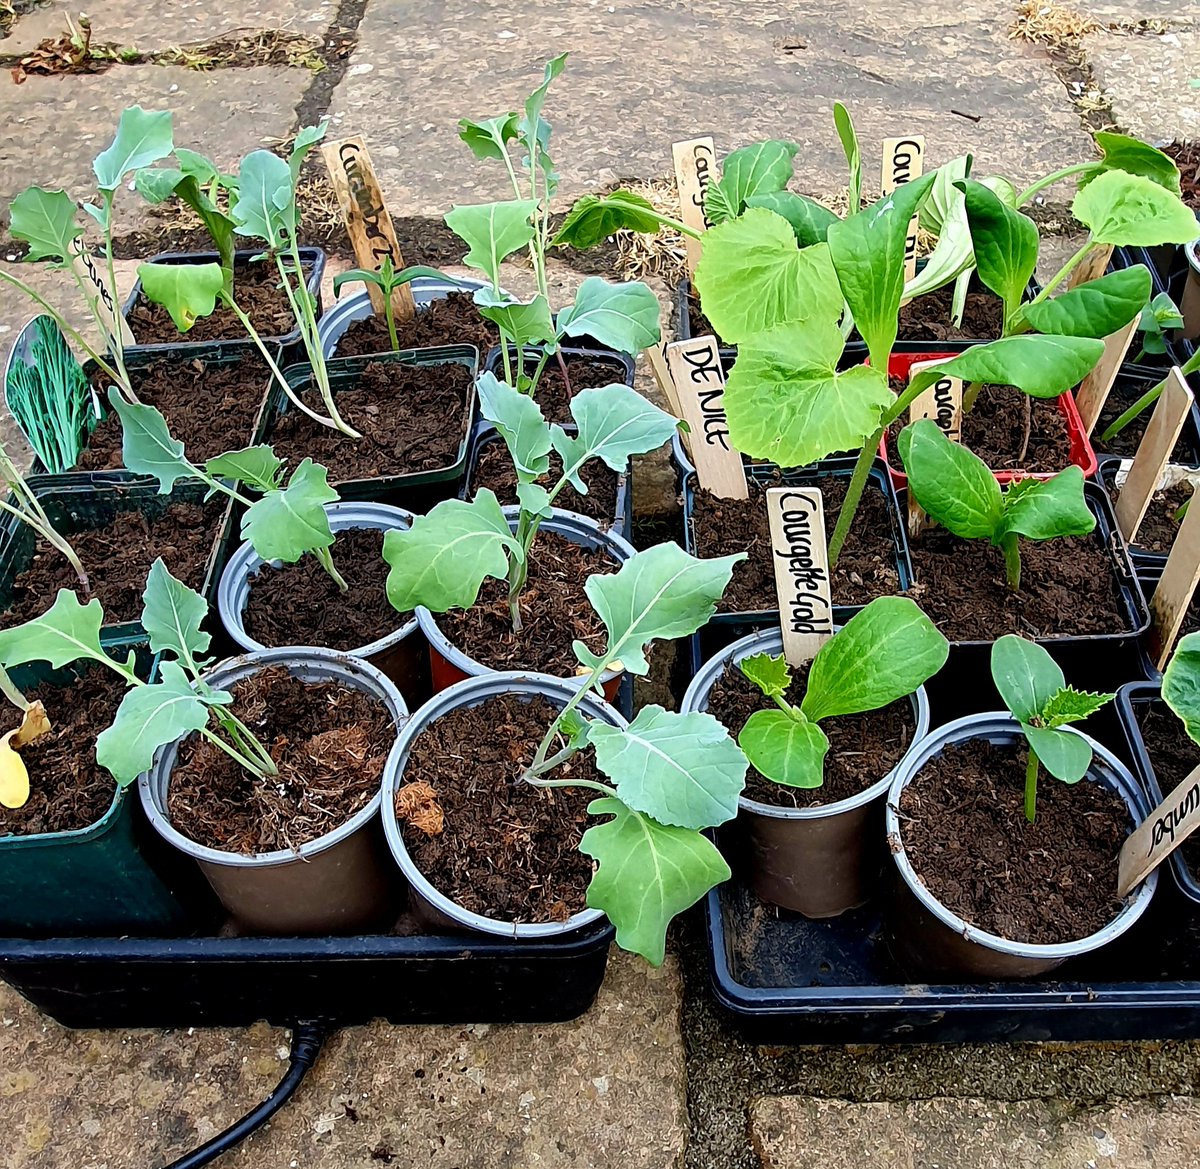 Weekend of potting on lots of brassicas and summer squashes. #GardensHour